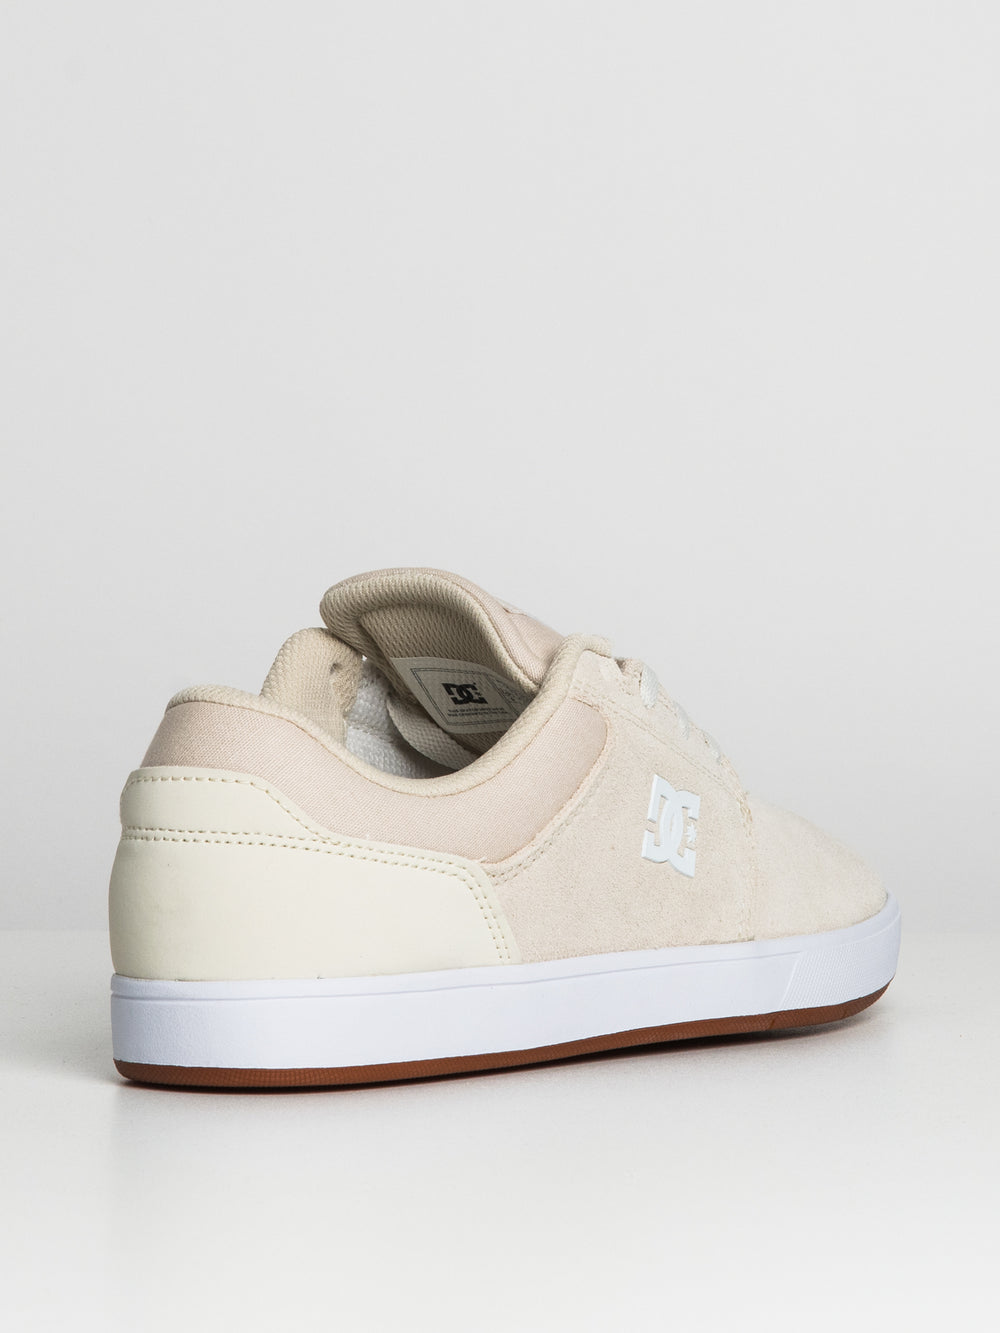 MENS DC Boathouse CRISIS 2 Collective | SHOES Footwear